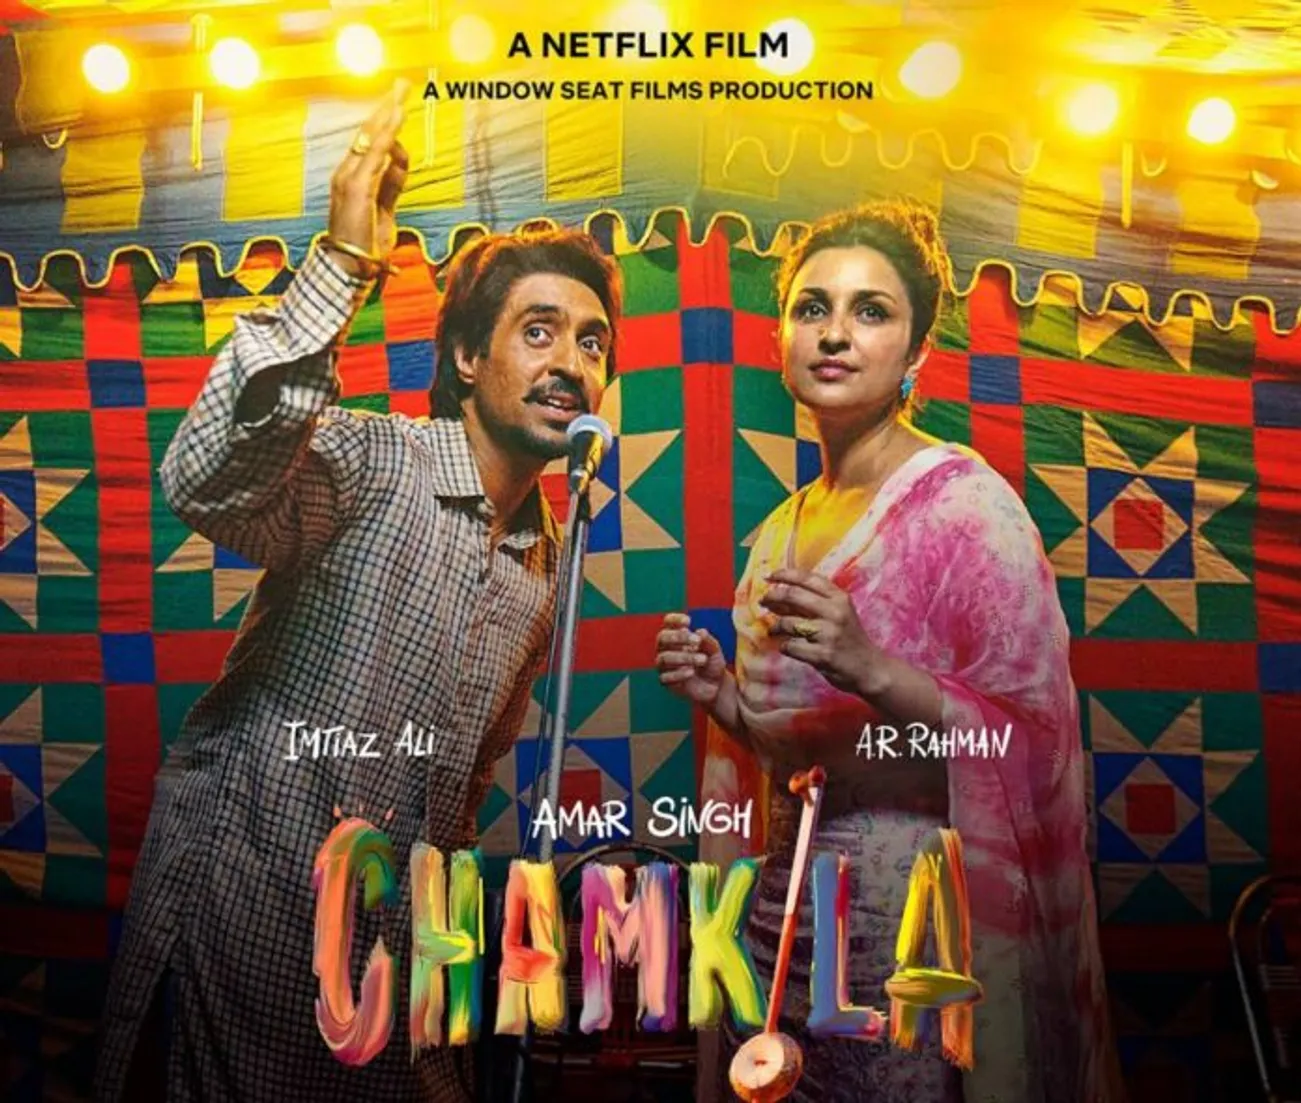 Amar Singh Chamkila Release Date, Cast and Plot